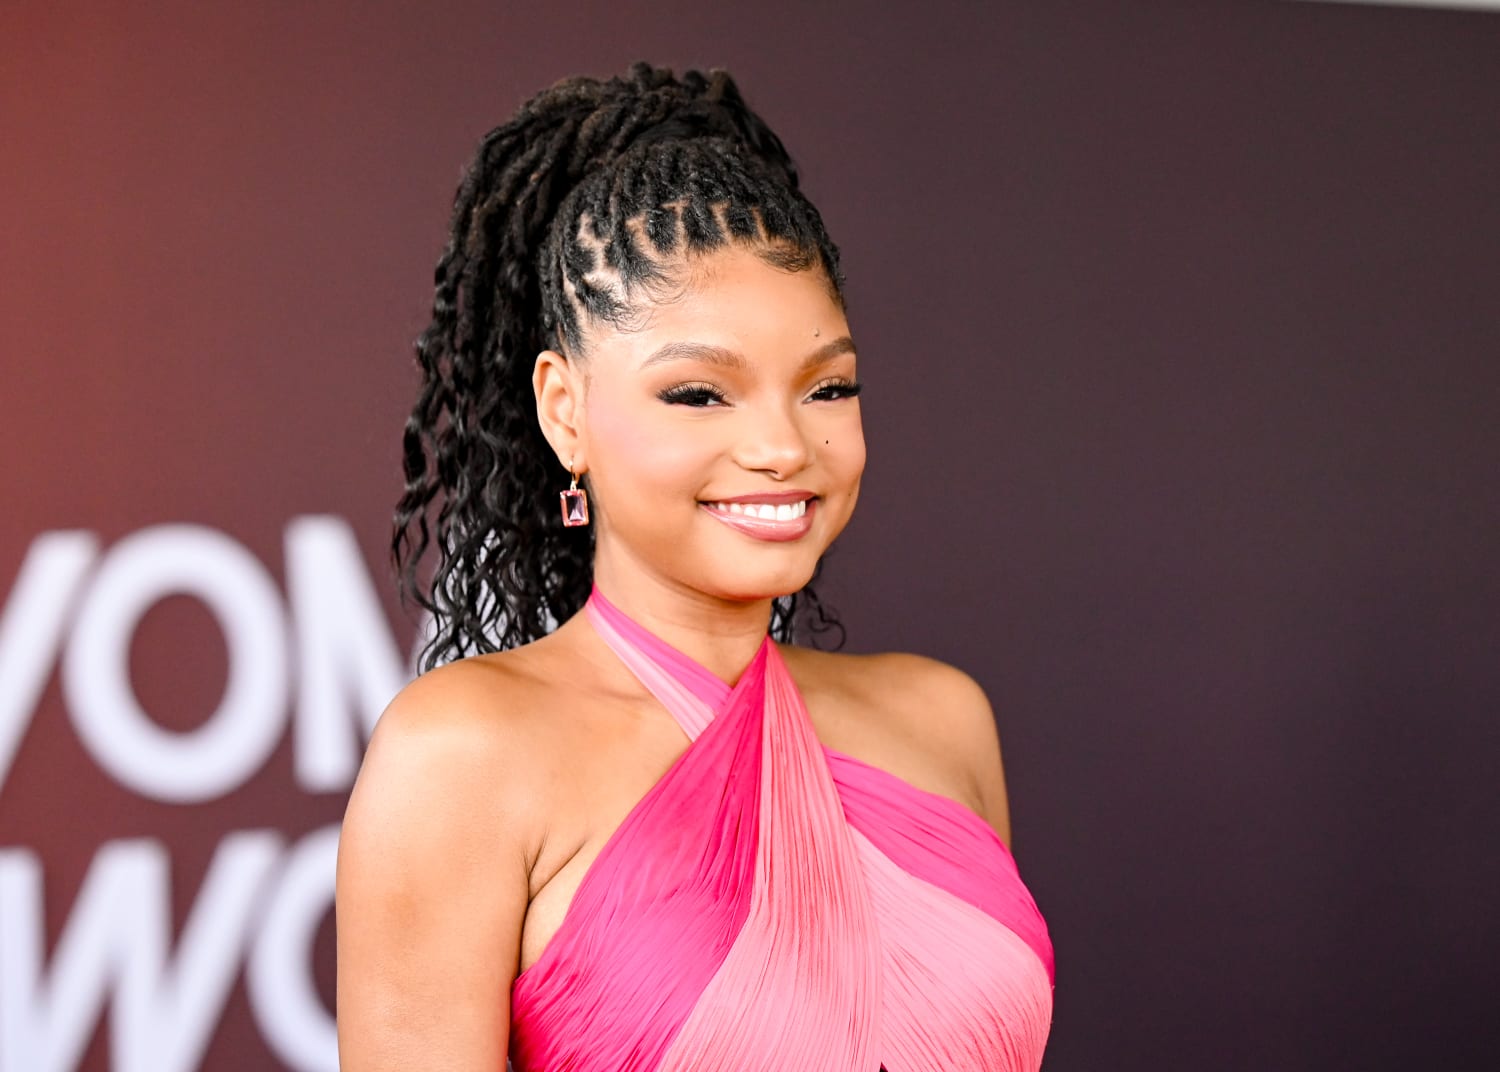 Halle Bailey shares first family photo showing son Halo's face